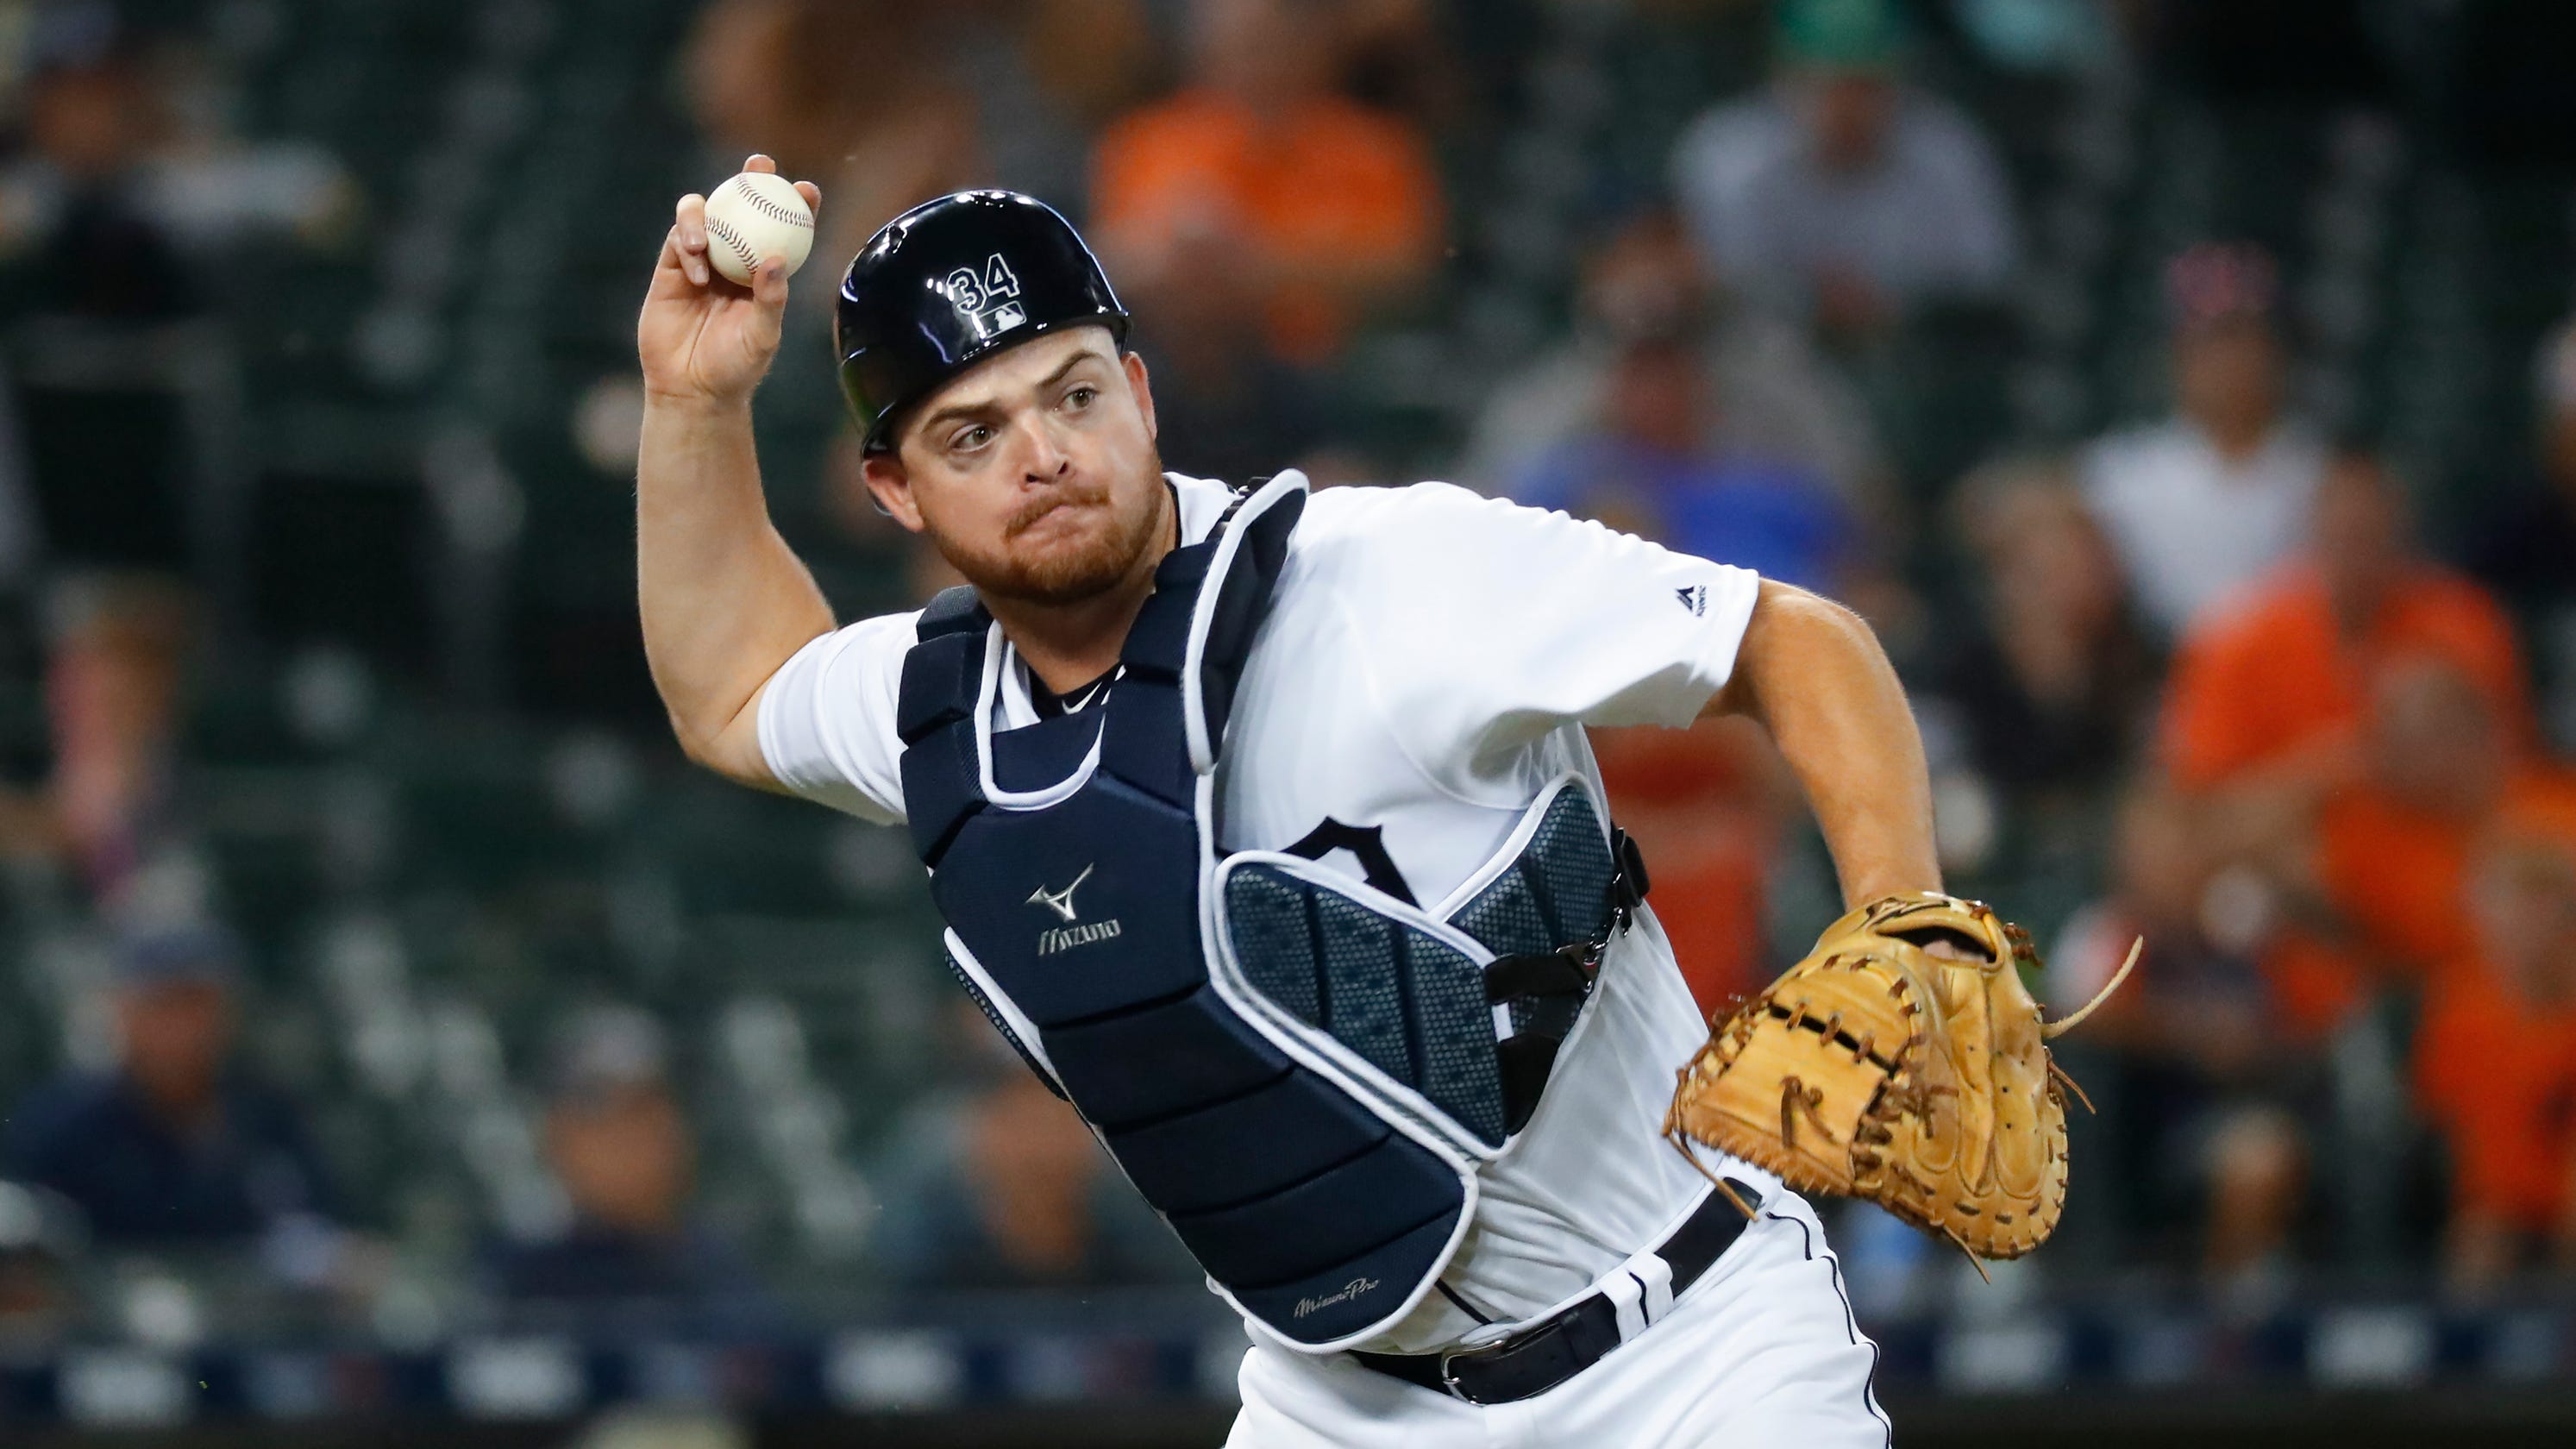 Pitch-framing at root of Tigers catcher Jake Rogers' passed ball issue